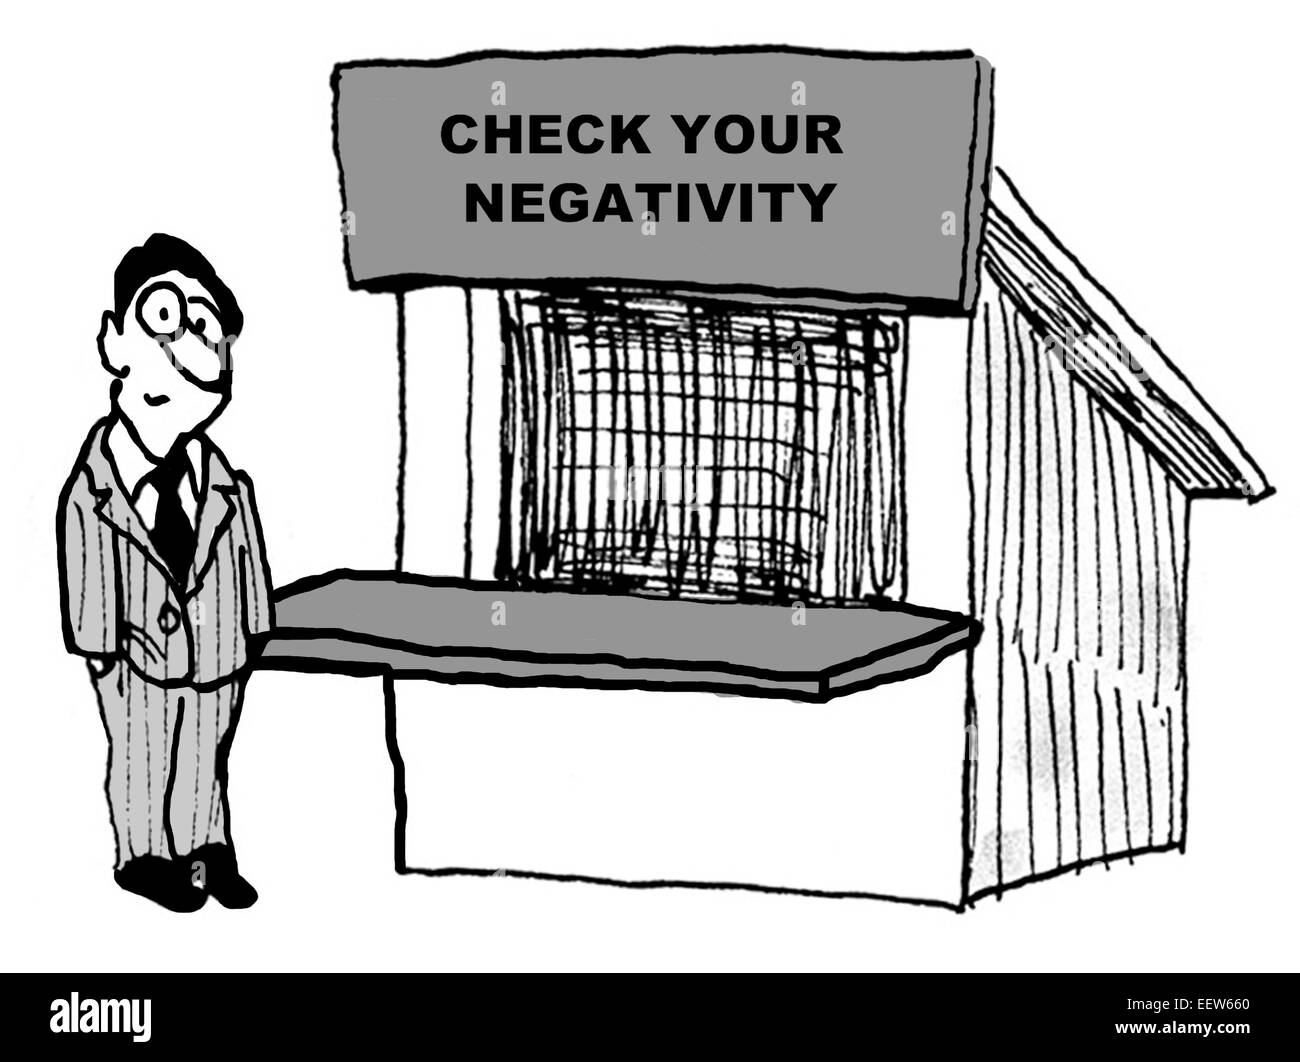 Cartoon of businessman and sign reminding him to 'check your negativity'. Stock Photo